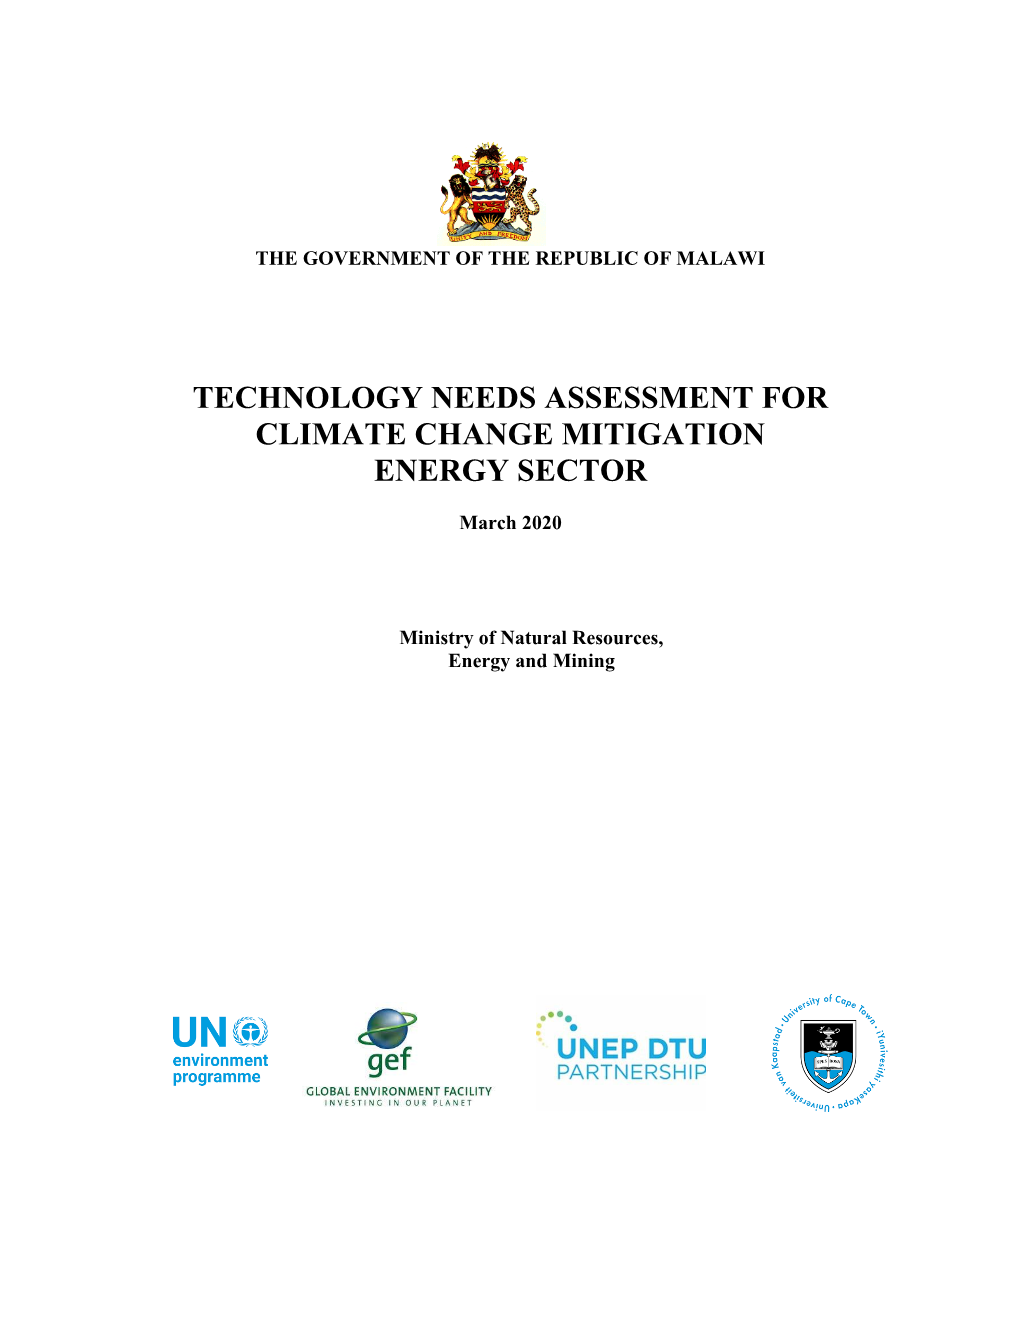 Technology Needs Assessment for Climate Change Mitigation Energy Sector